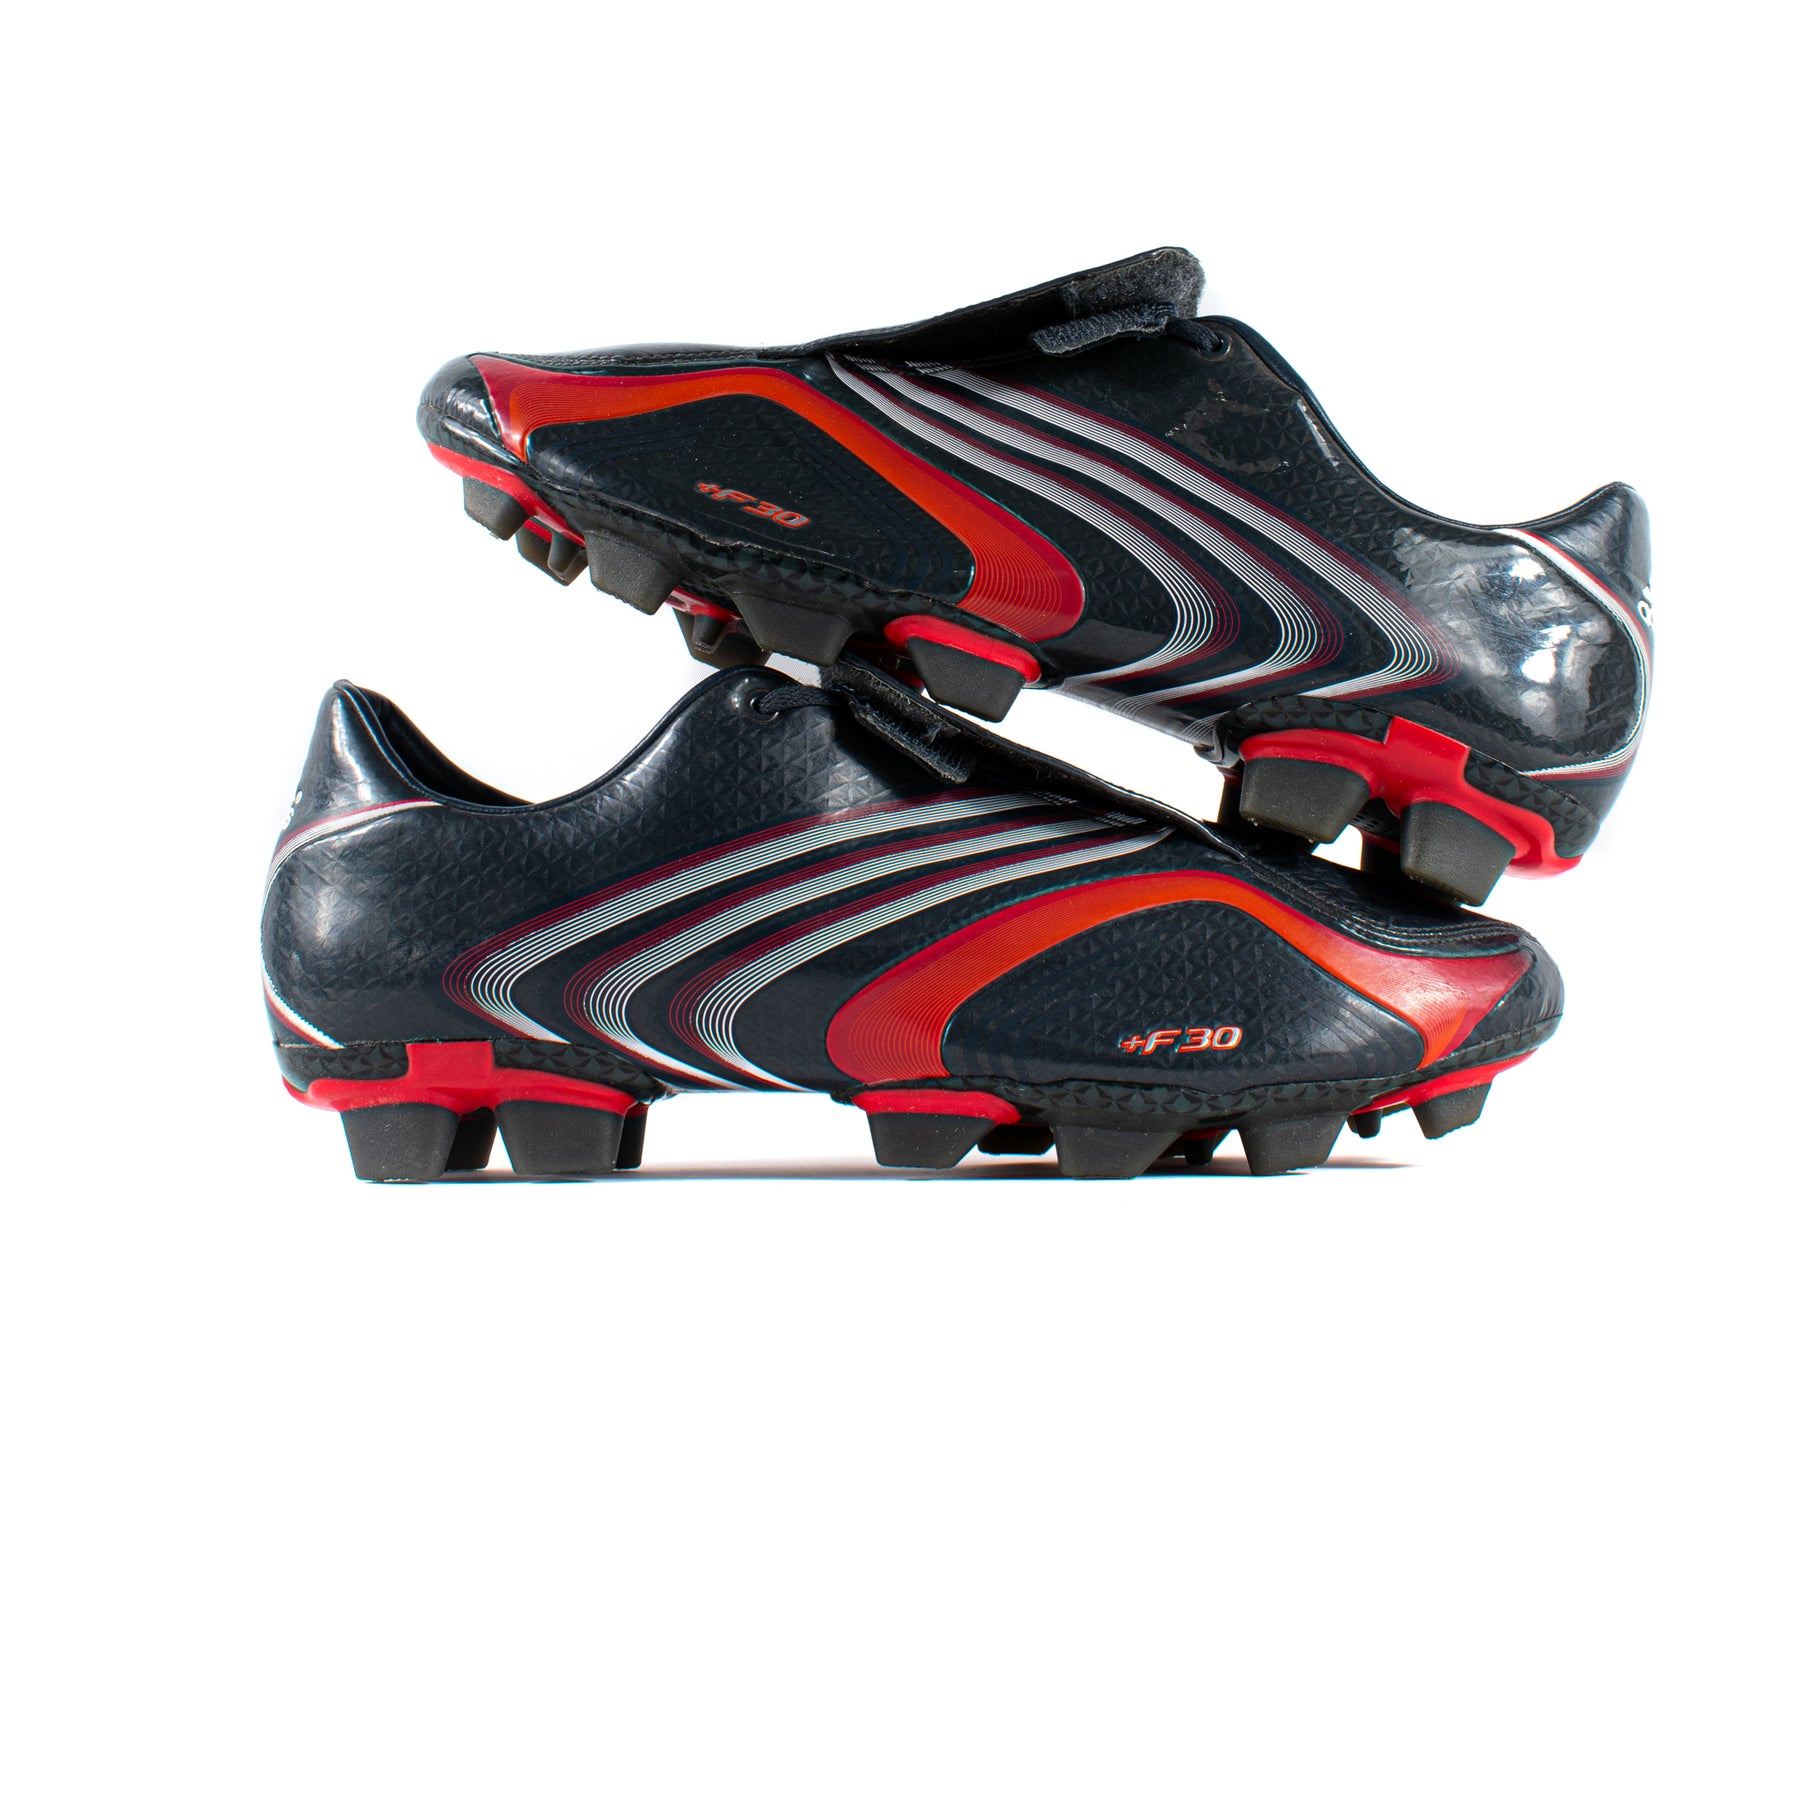 Adidas F30.6 Charcoal Red FG – Cleats